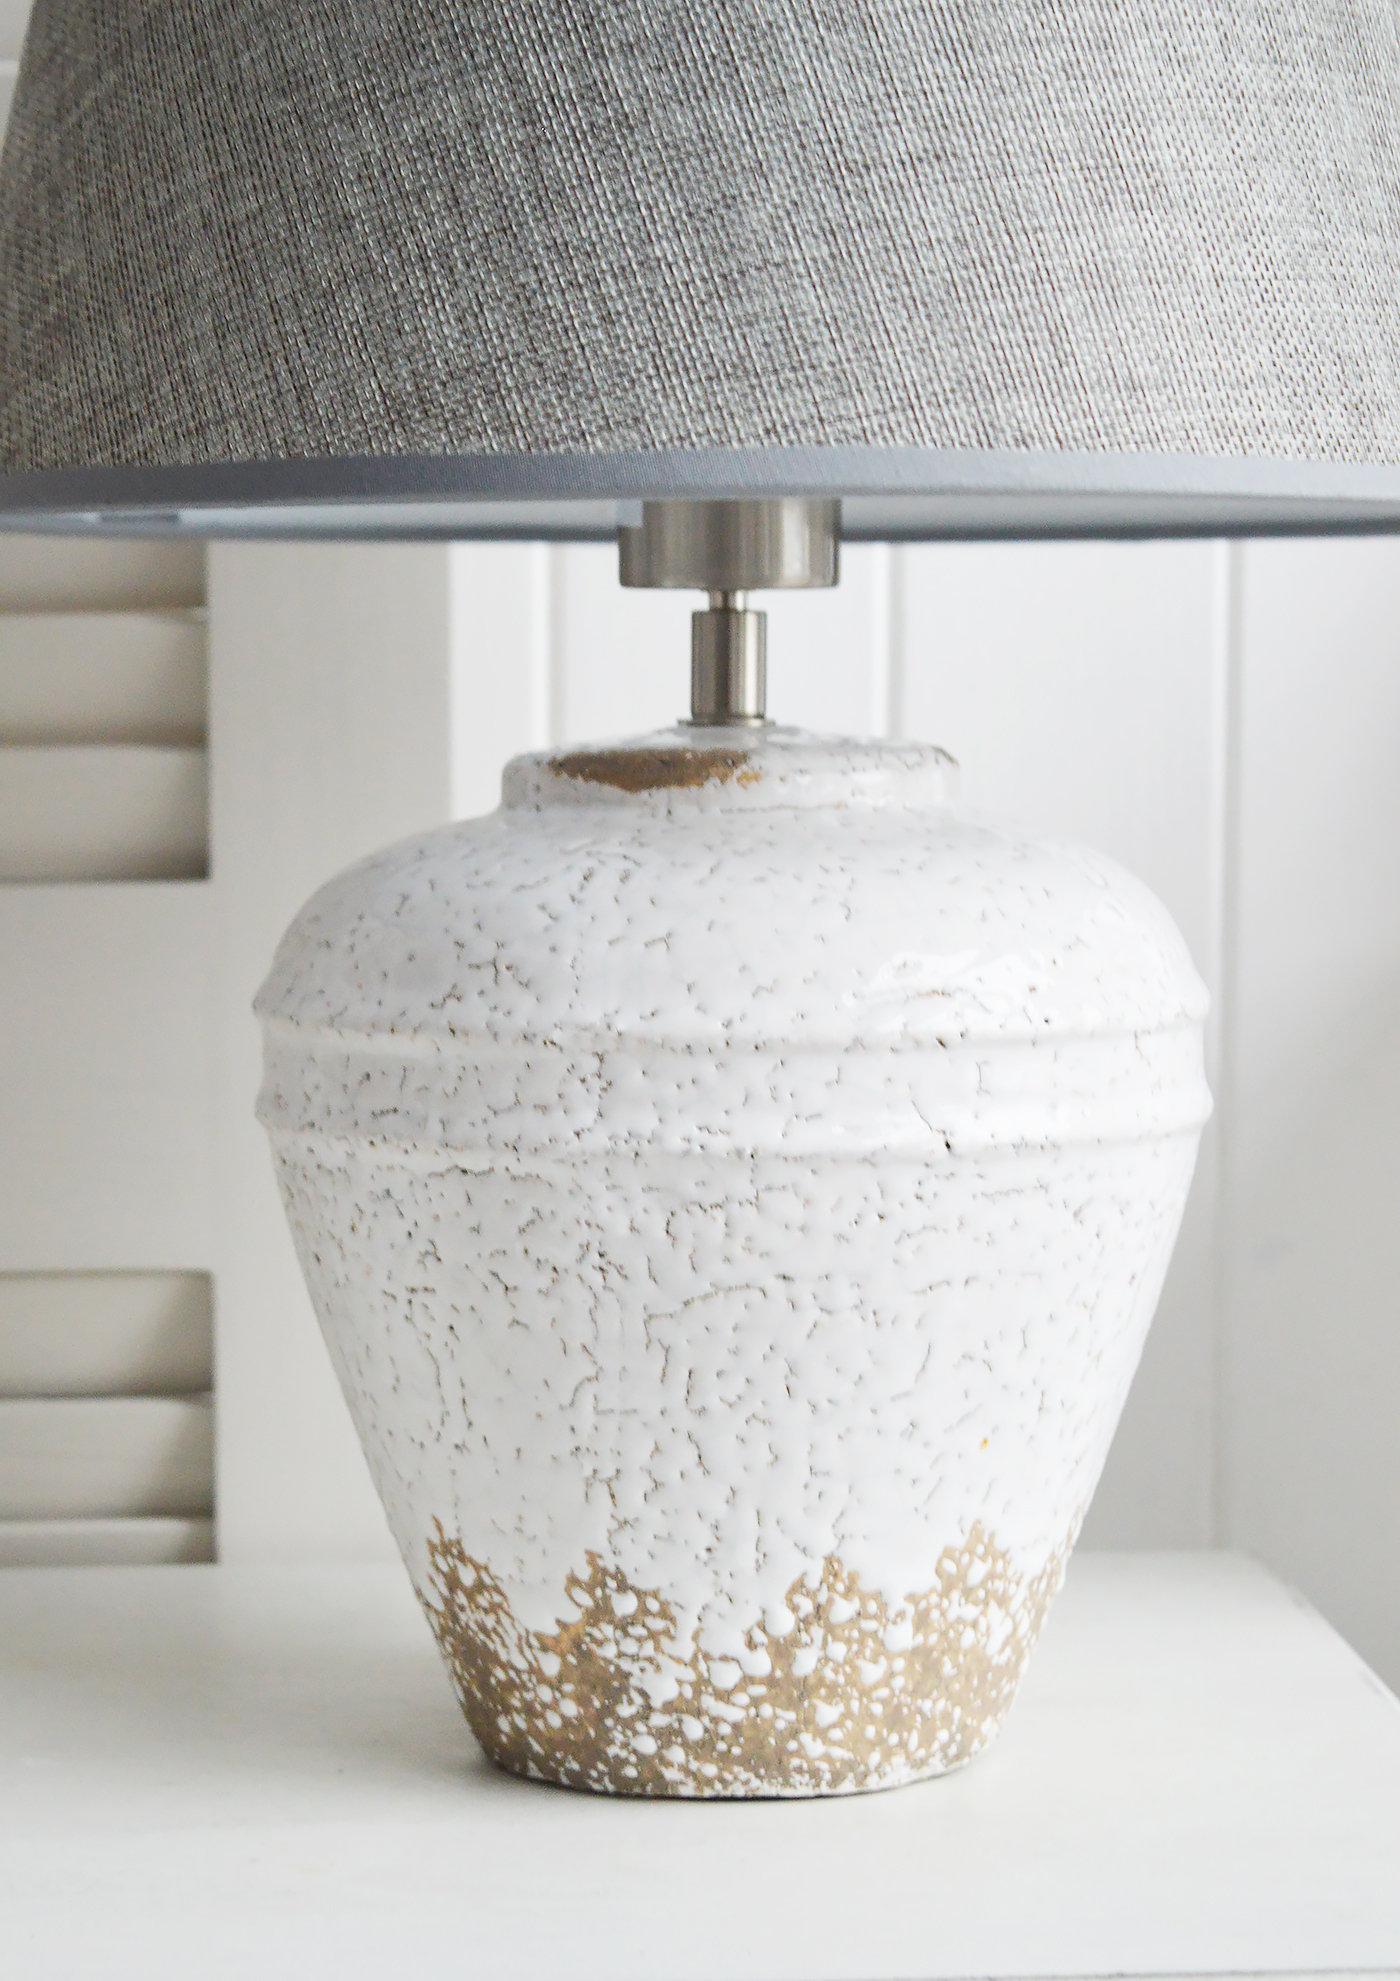 New England style lamps. Charlton Table Lamp - Stone lamp for modern farmhouse , country, coastal homes